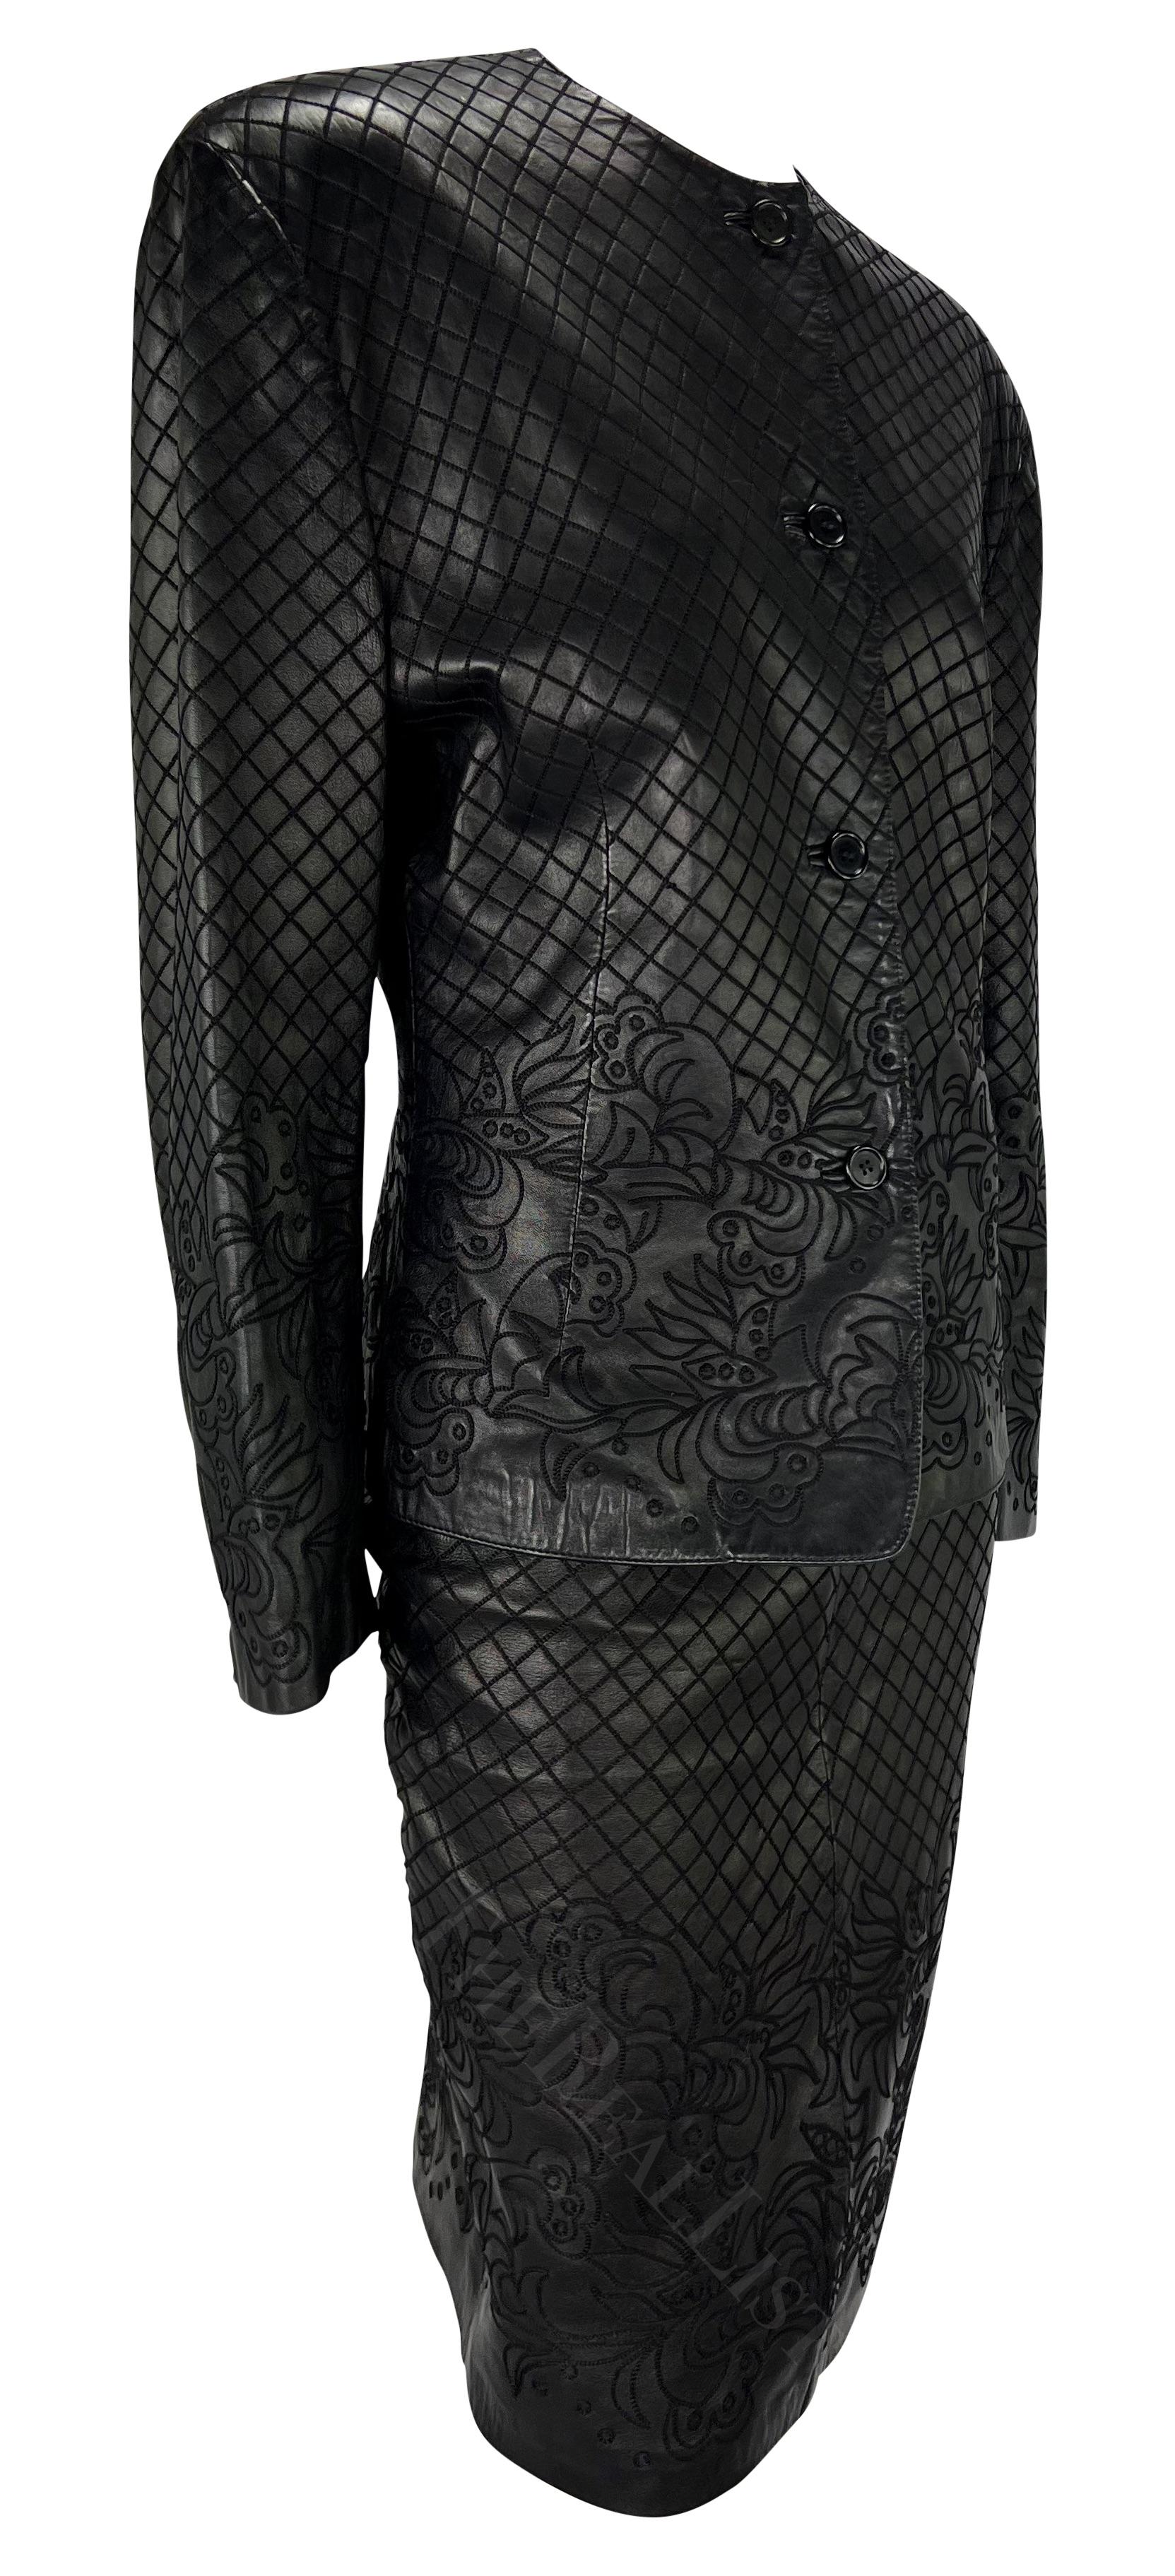 F/W 1986 Gianni Versace Runway Black Leather Embroidered Floral Skirt Set For Sale 3